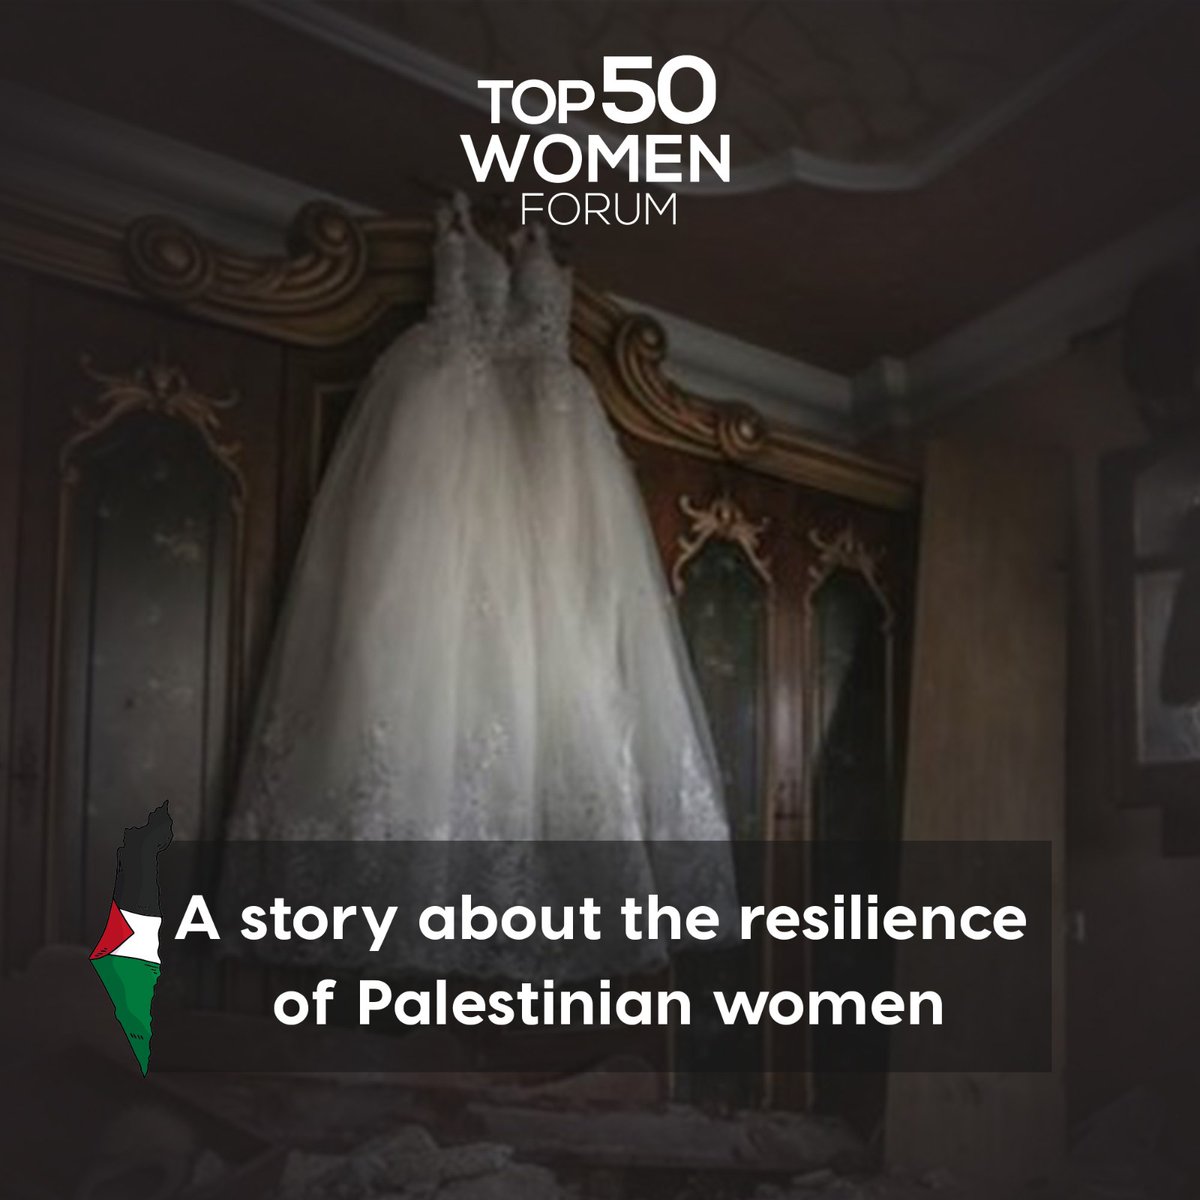 'The #wedding day was approaching. It could have been a reason to rejoice amid what we are going through. Despite all of this, we'll reclaim our homeland no matter the cost or how long it takes'

#Top50WomenForum #Top50 #PalestinianWomen #WomenofPalestine